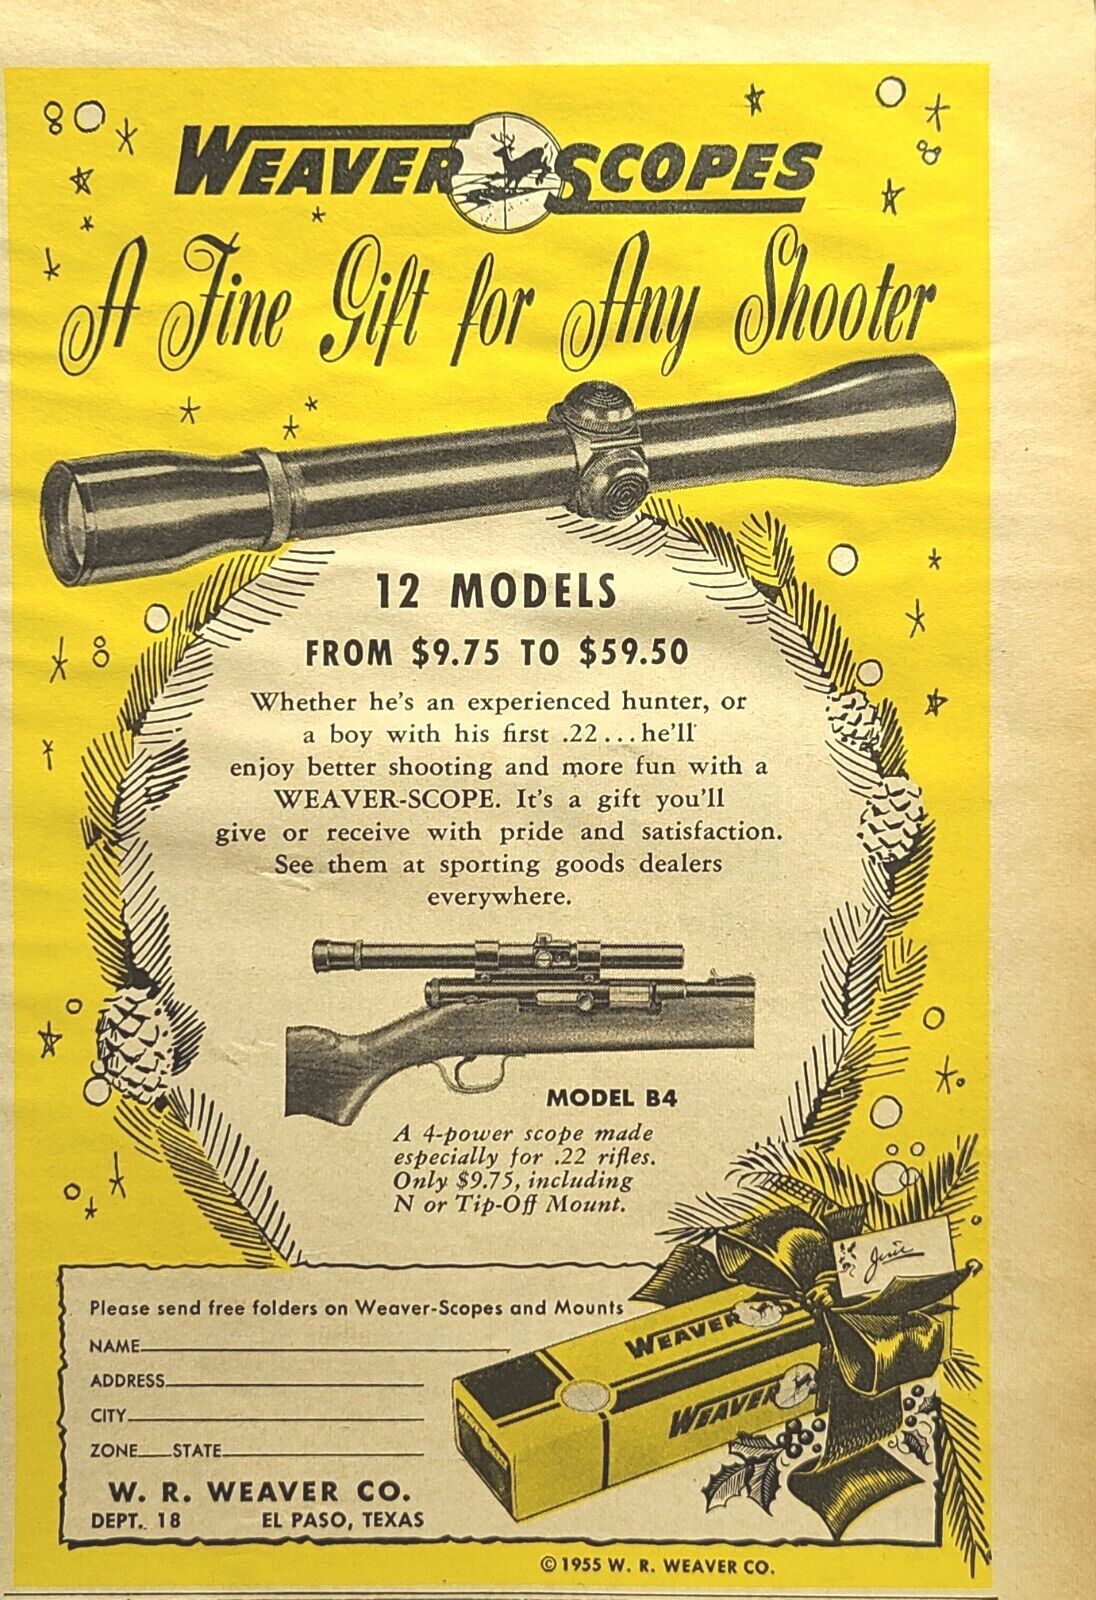 Weaver-Scopes Christmas Gift For Shooters El Paso Texas Vintage Print Ad 1955